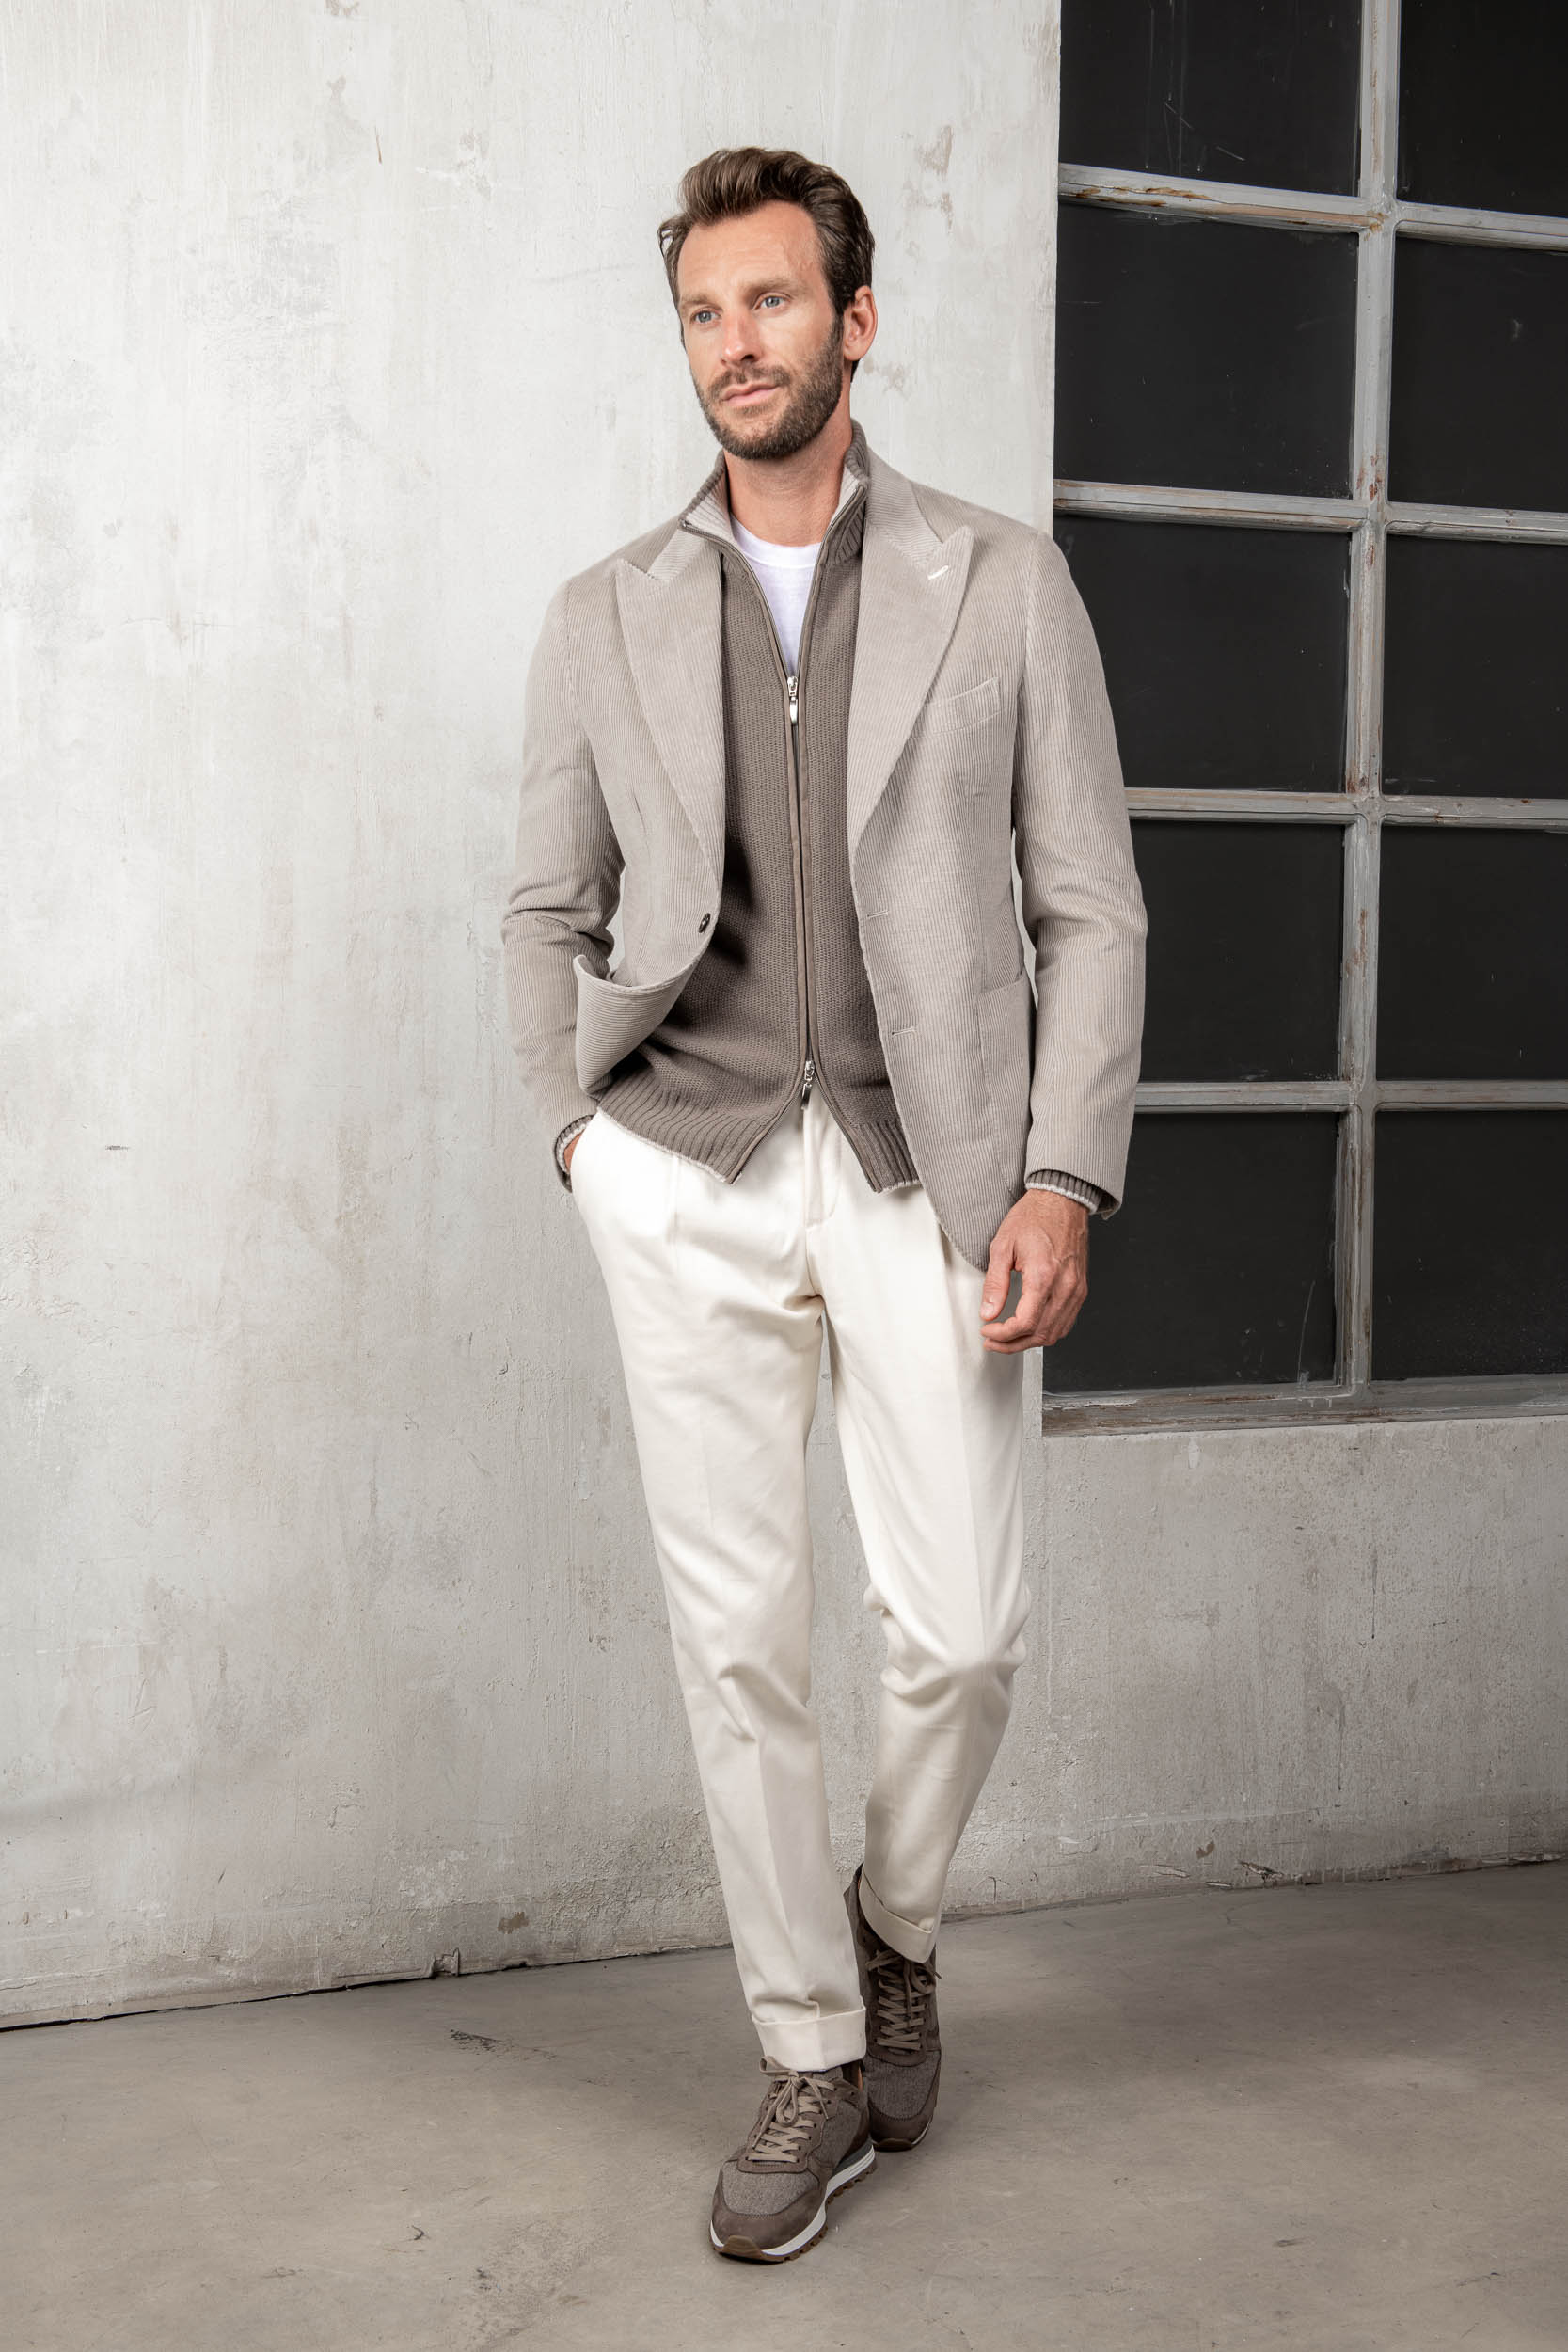 Beige corduroy jacket "Soragna Collection" - Made in Italy